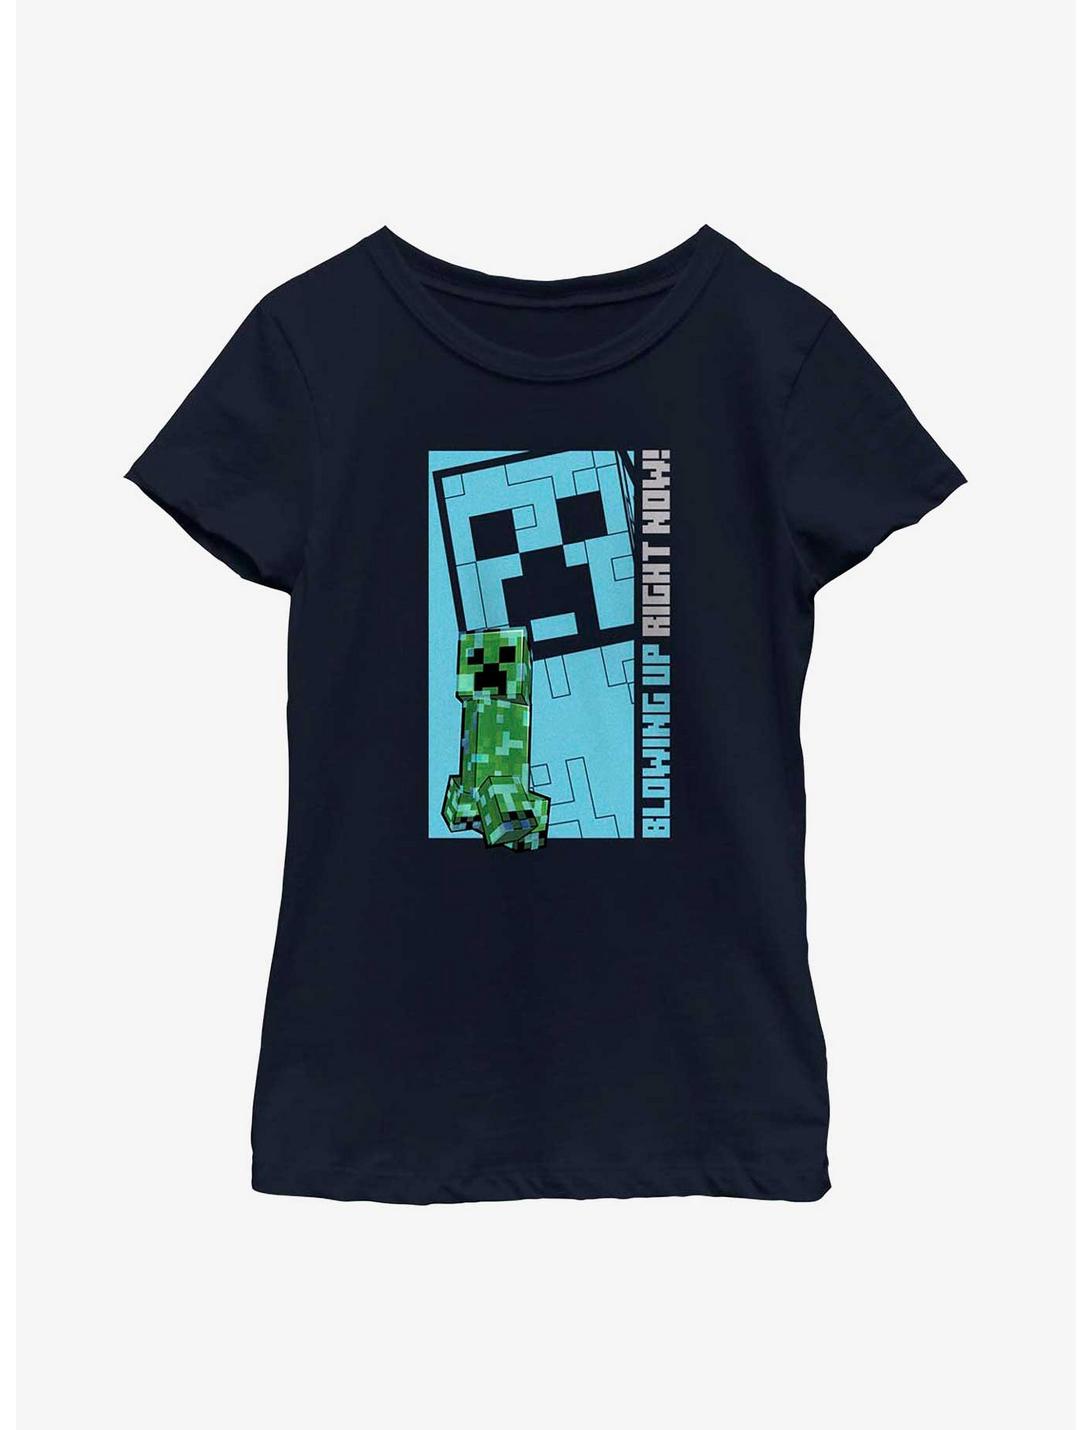 Minecraft Mine Blowing Up Youth Girls T-Shirt, NAVY, hi-res